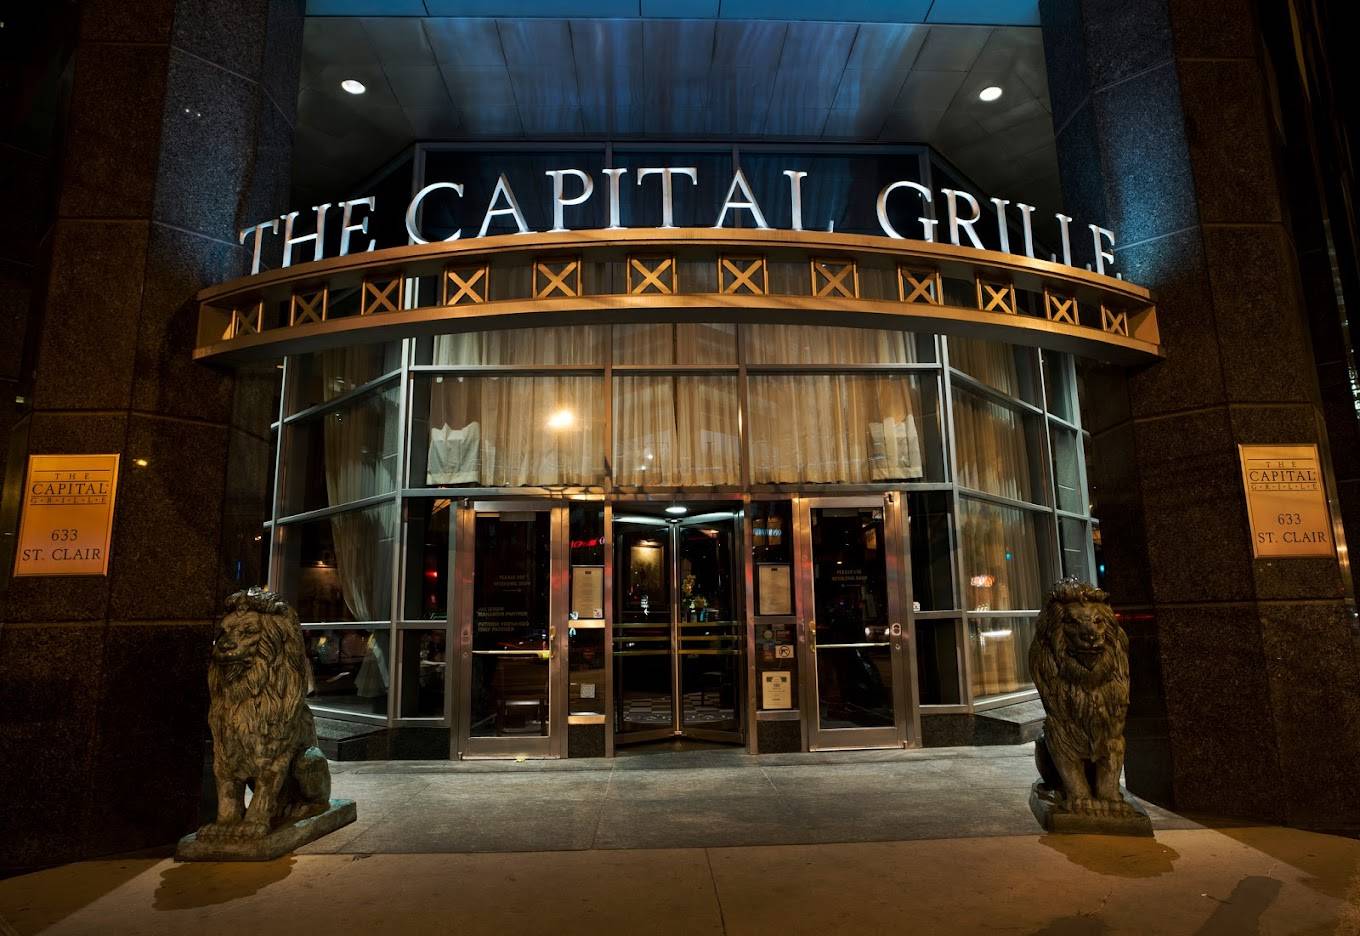 The Capital Grille - best steakhouse in Chicago Suburbs